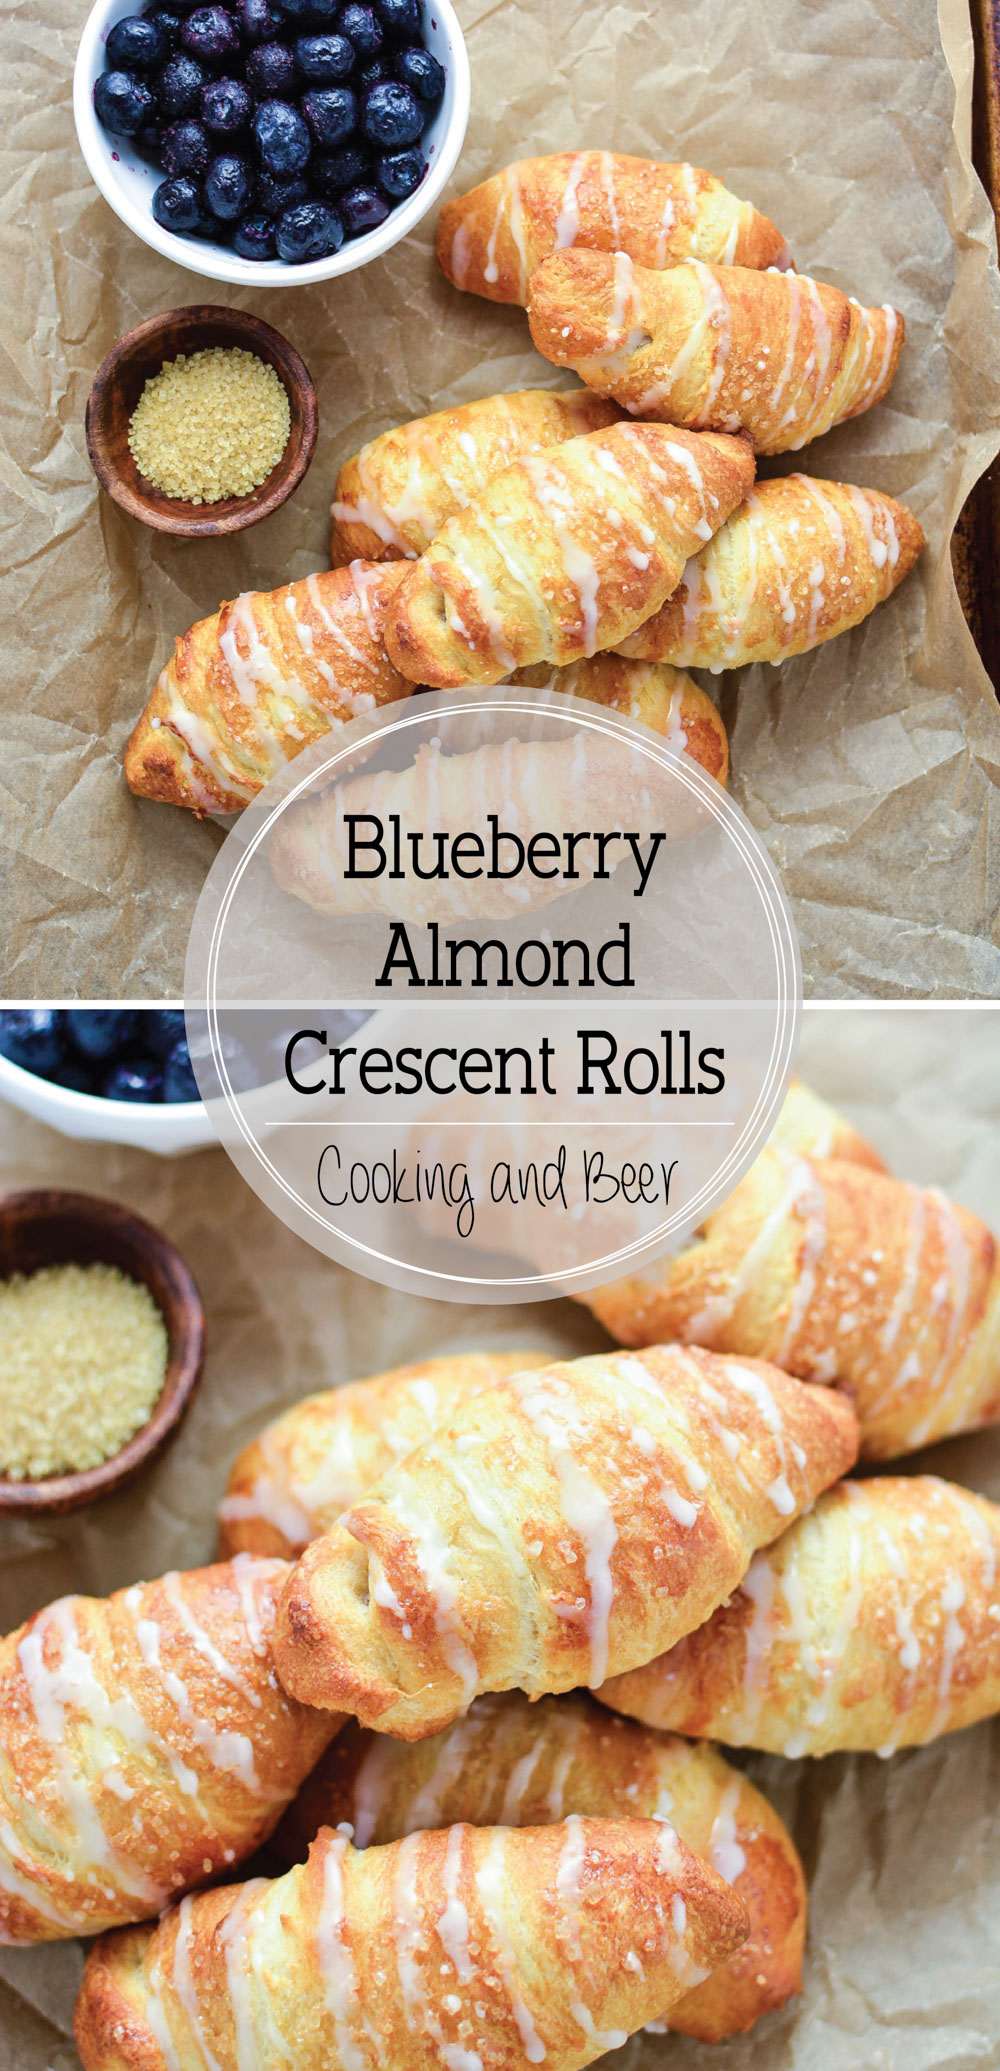 Blueberry Almond Crescent Rolls are the perfect quick and simple breakfast recipe using store bought crescent roll dough and just a handful of ingredients!